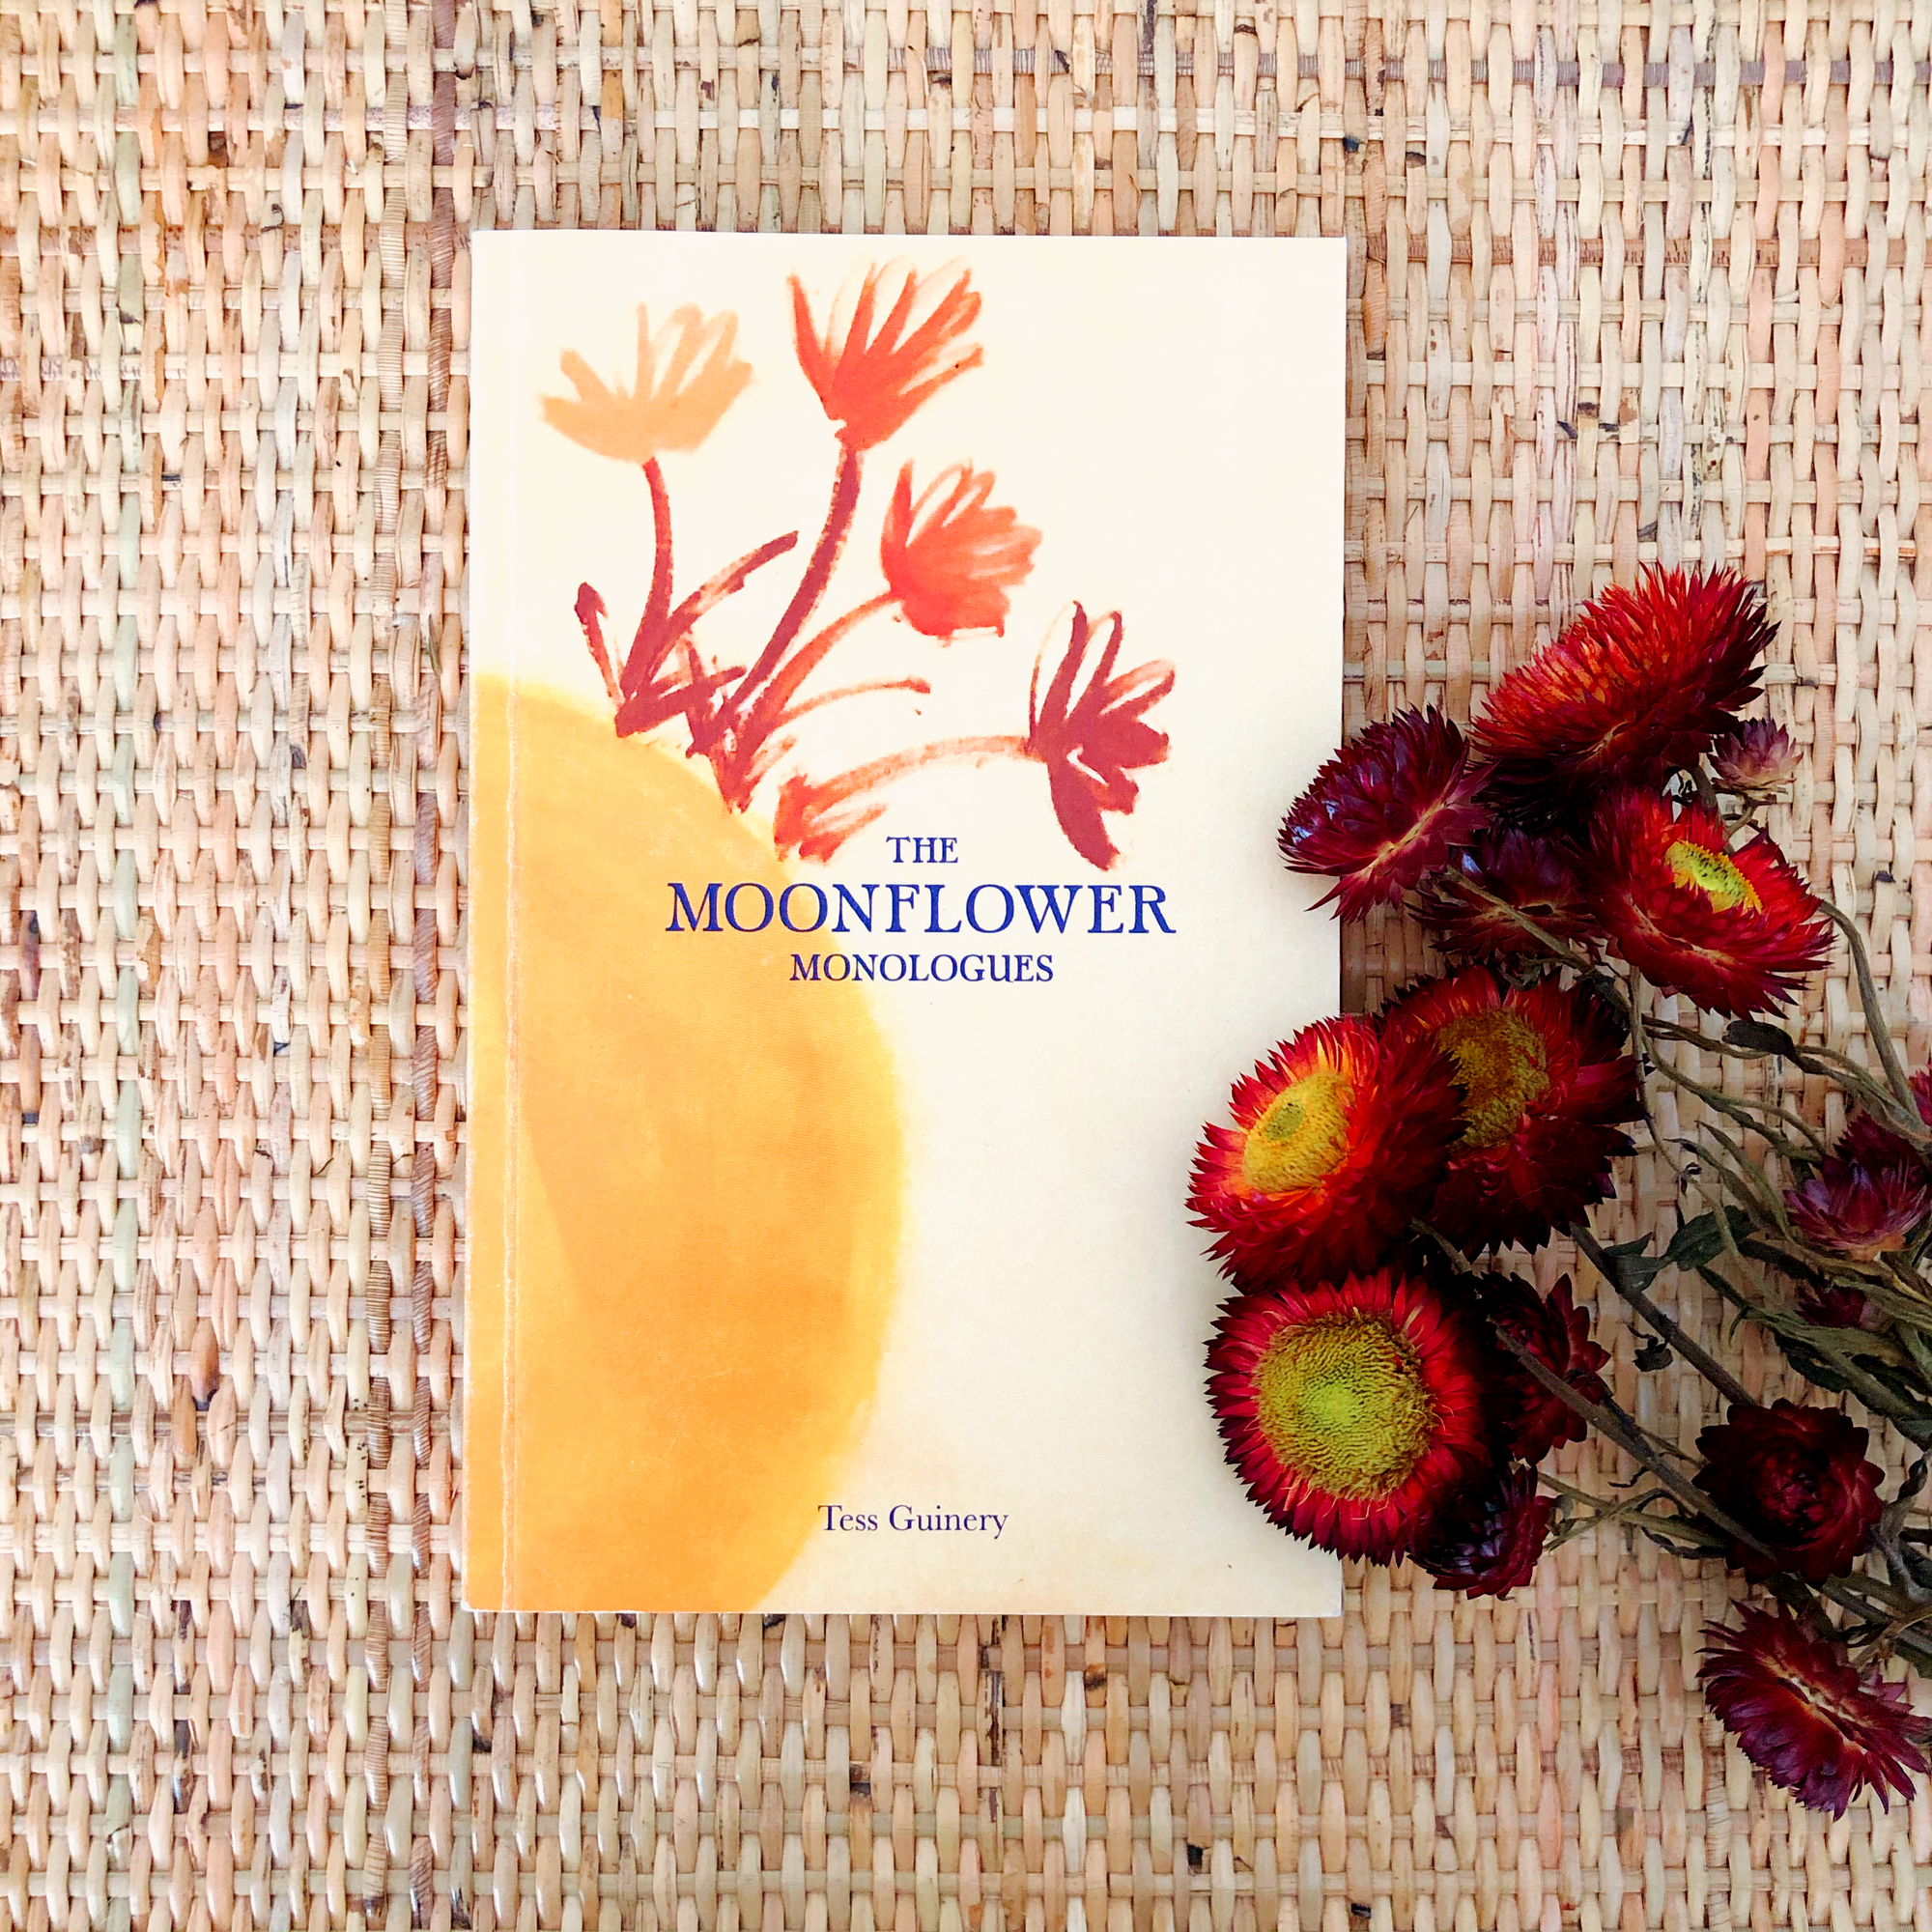 THE MOONFLOWER MONOLOGUES BY TESS GUINERY